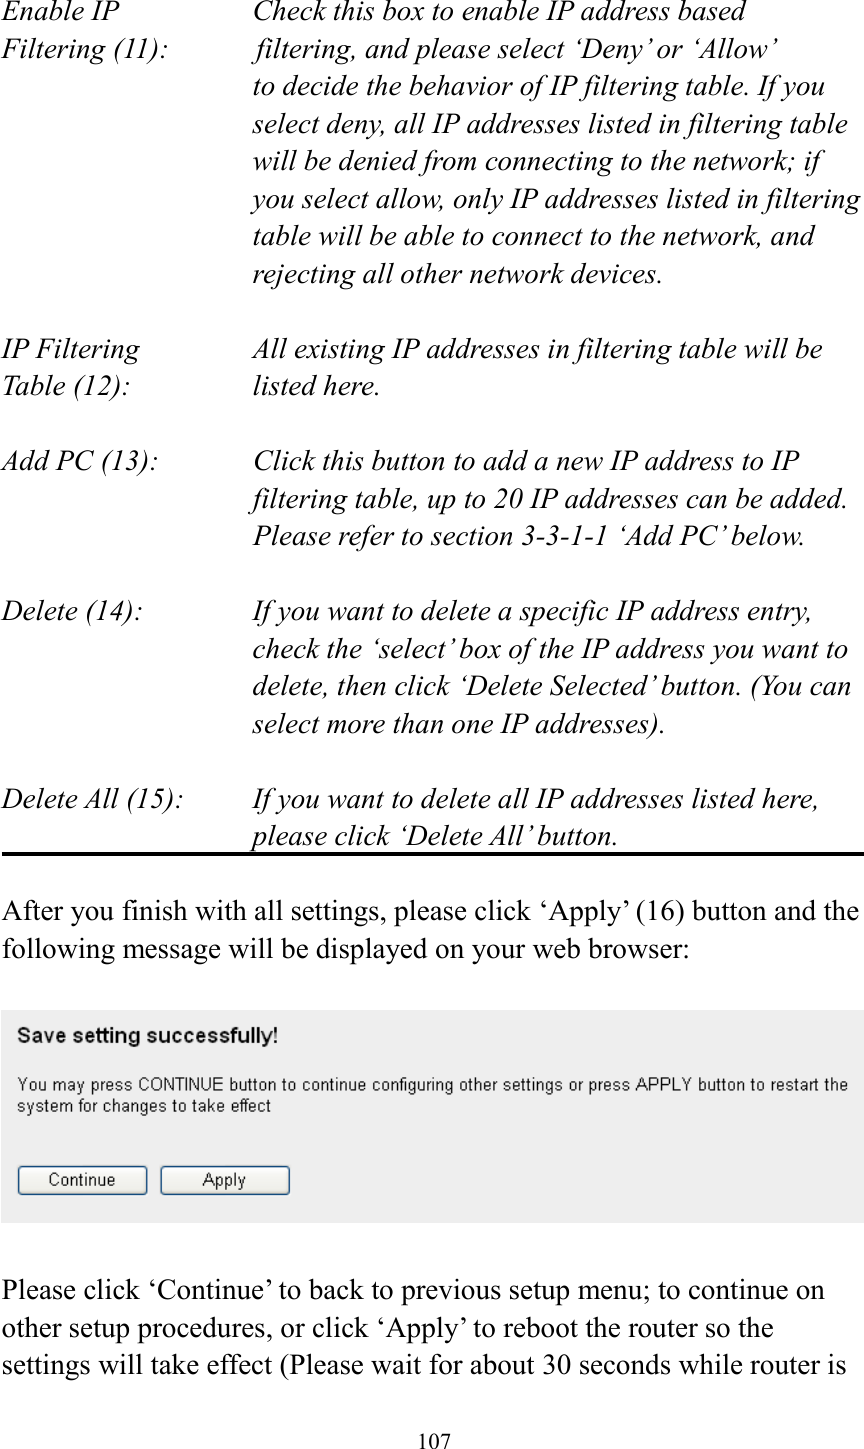 107  Enable IP        Check this box to enable IP address based Filtering (11):       filtering, and please select ‘Deny’ or ‘Allow’   to decide the behavior of IP filtering table. If you select deny, all IP addresses listed in filtering table will be denied from connecting to the network; if you select allow, only IP addresses listed in filtering table will be able to connect to the network, and rejecting all other network devices.  IP Filtering      All existing IP addresses in filtering table will be Table (12):       listed here.  Add PC (13):    Click this button to add a new IP address to IP filtering table, up to 20 IP addresses can be added.   Please refer to section 3-3-1-1 ‘Add PC’ below.    Delete (14):      If you want to delete a specific IP address entry,     check the ‘select’ box of the IP address you want to delete, then click ‘Delete Selected’ button. (You can select more than one IP addresses).  Delete All (15):    If you want to delete all IP addresses listed here, please click ‘Delete All’ button.  After you finish with all settings, please click ‘Apply’ (16) button and the following message will be displayed on your web browser:    Please click ‘Continue’ to back to previous setup menu; to continue on other setup procedures, or click ‘Apply’ to reboot the router so the settings will take effect (Please wait for about 30 seconds while router is 